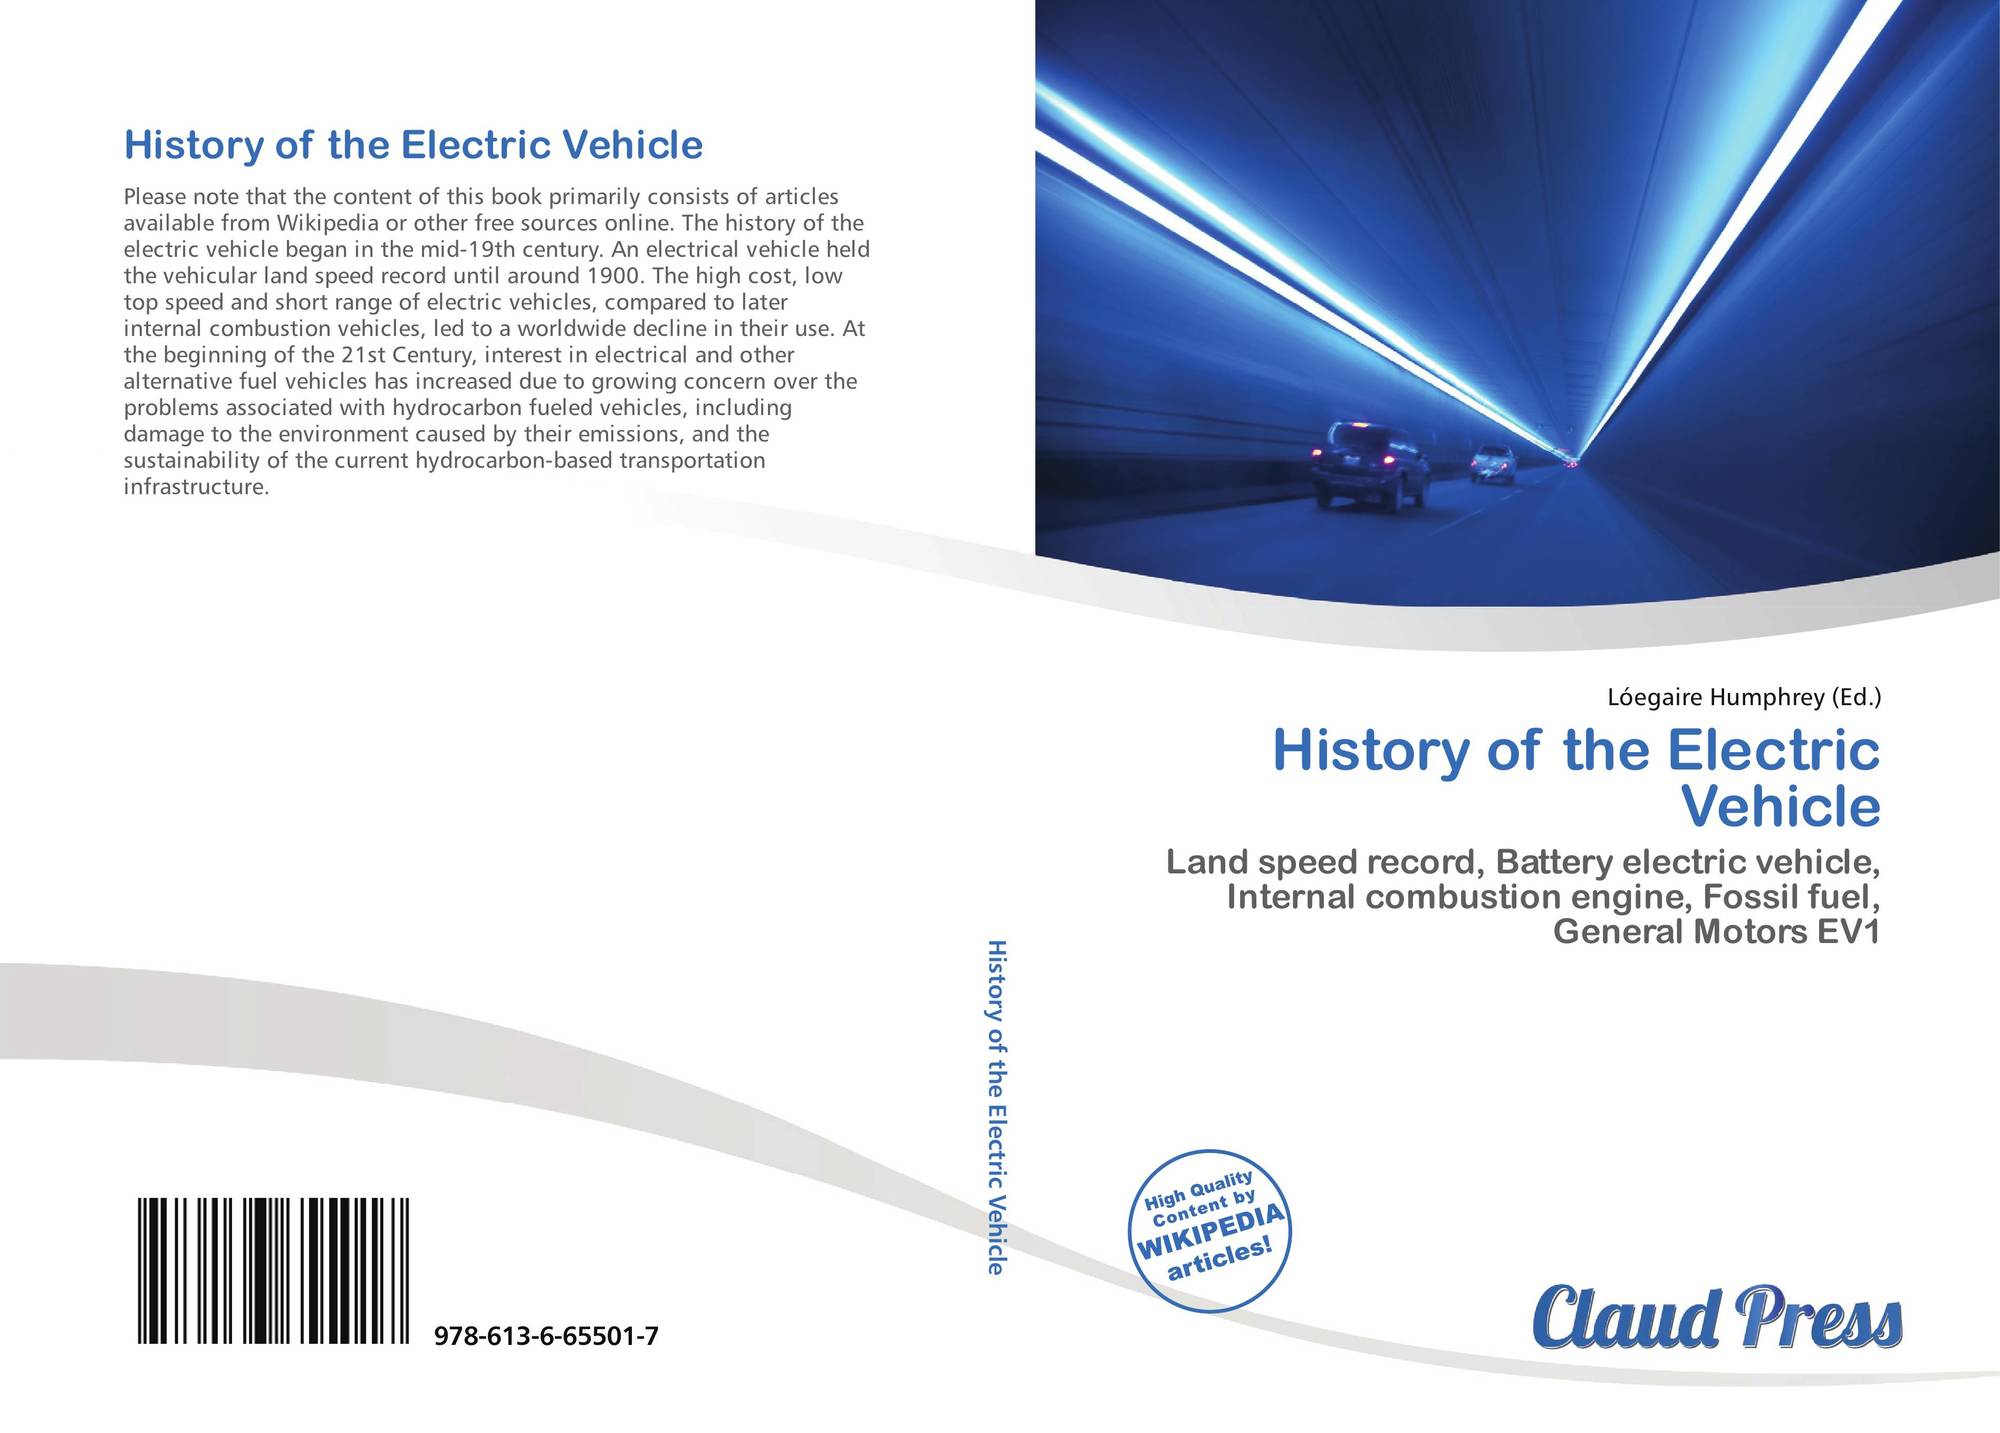 History of the Electric Vehicle, 9786136655017, 6136655012